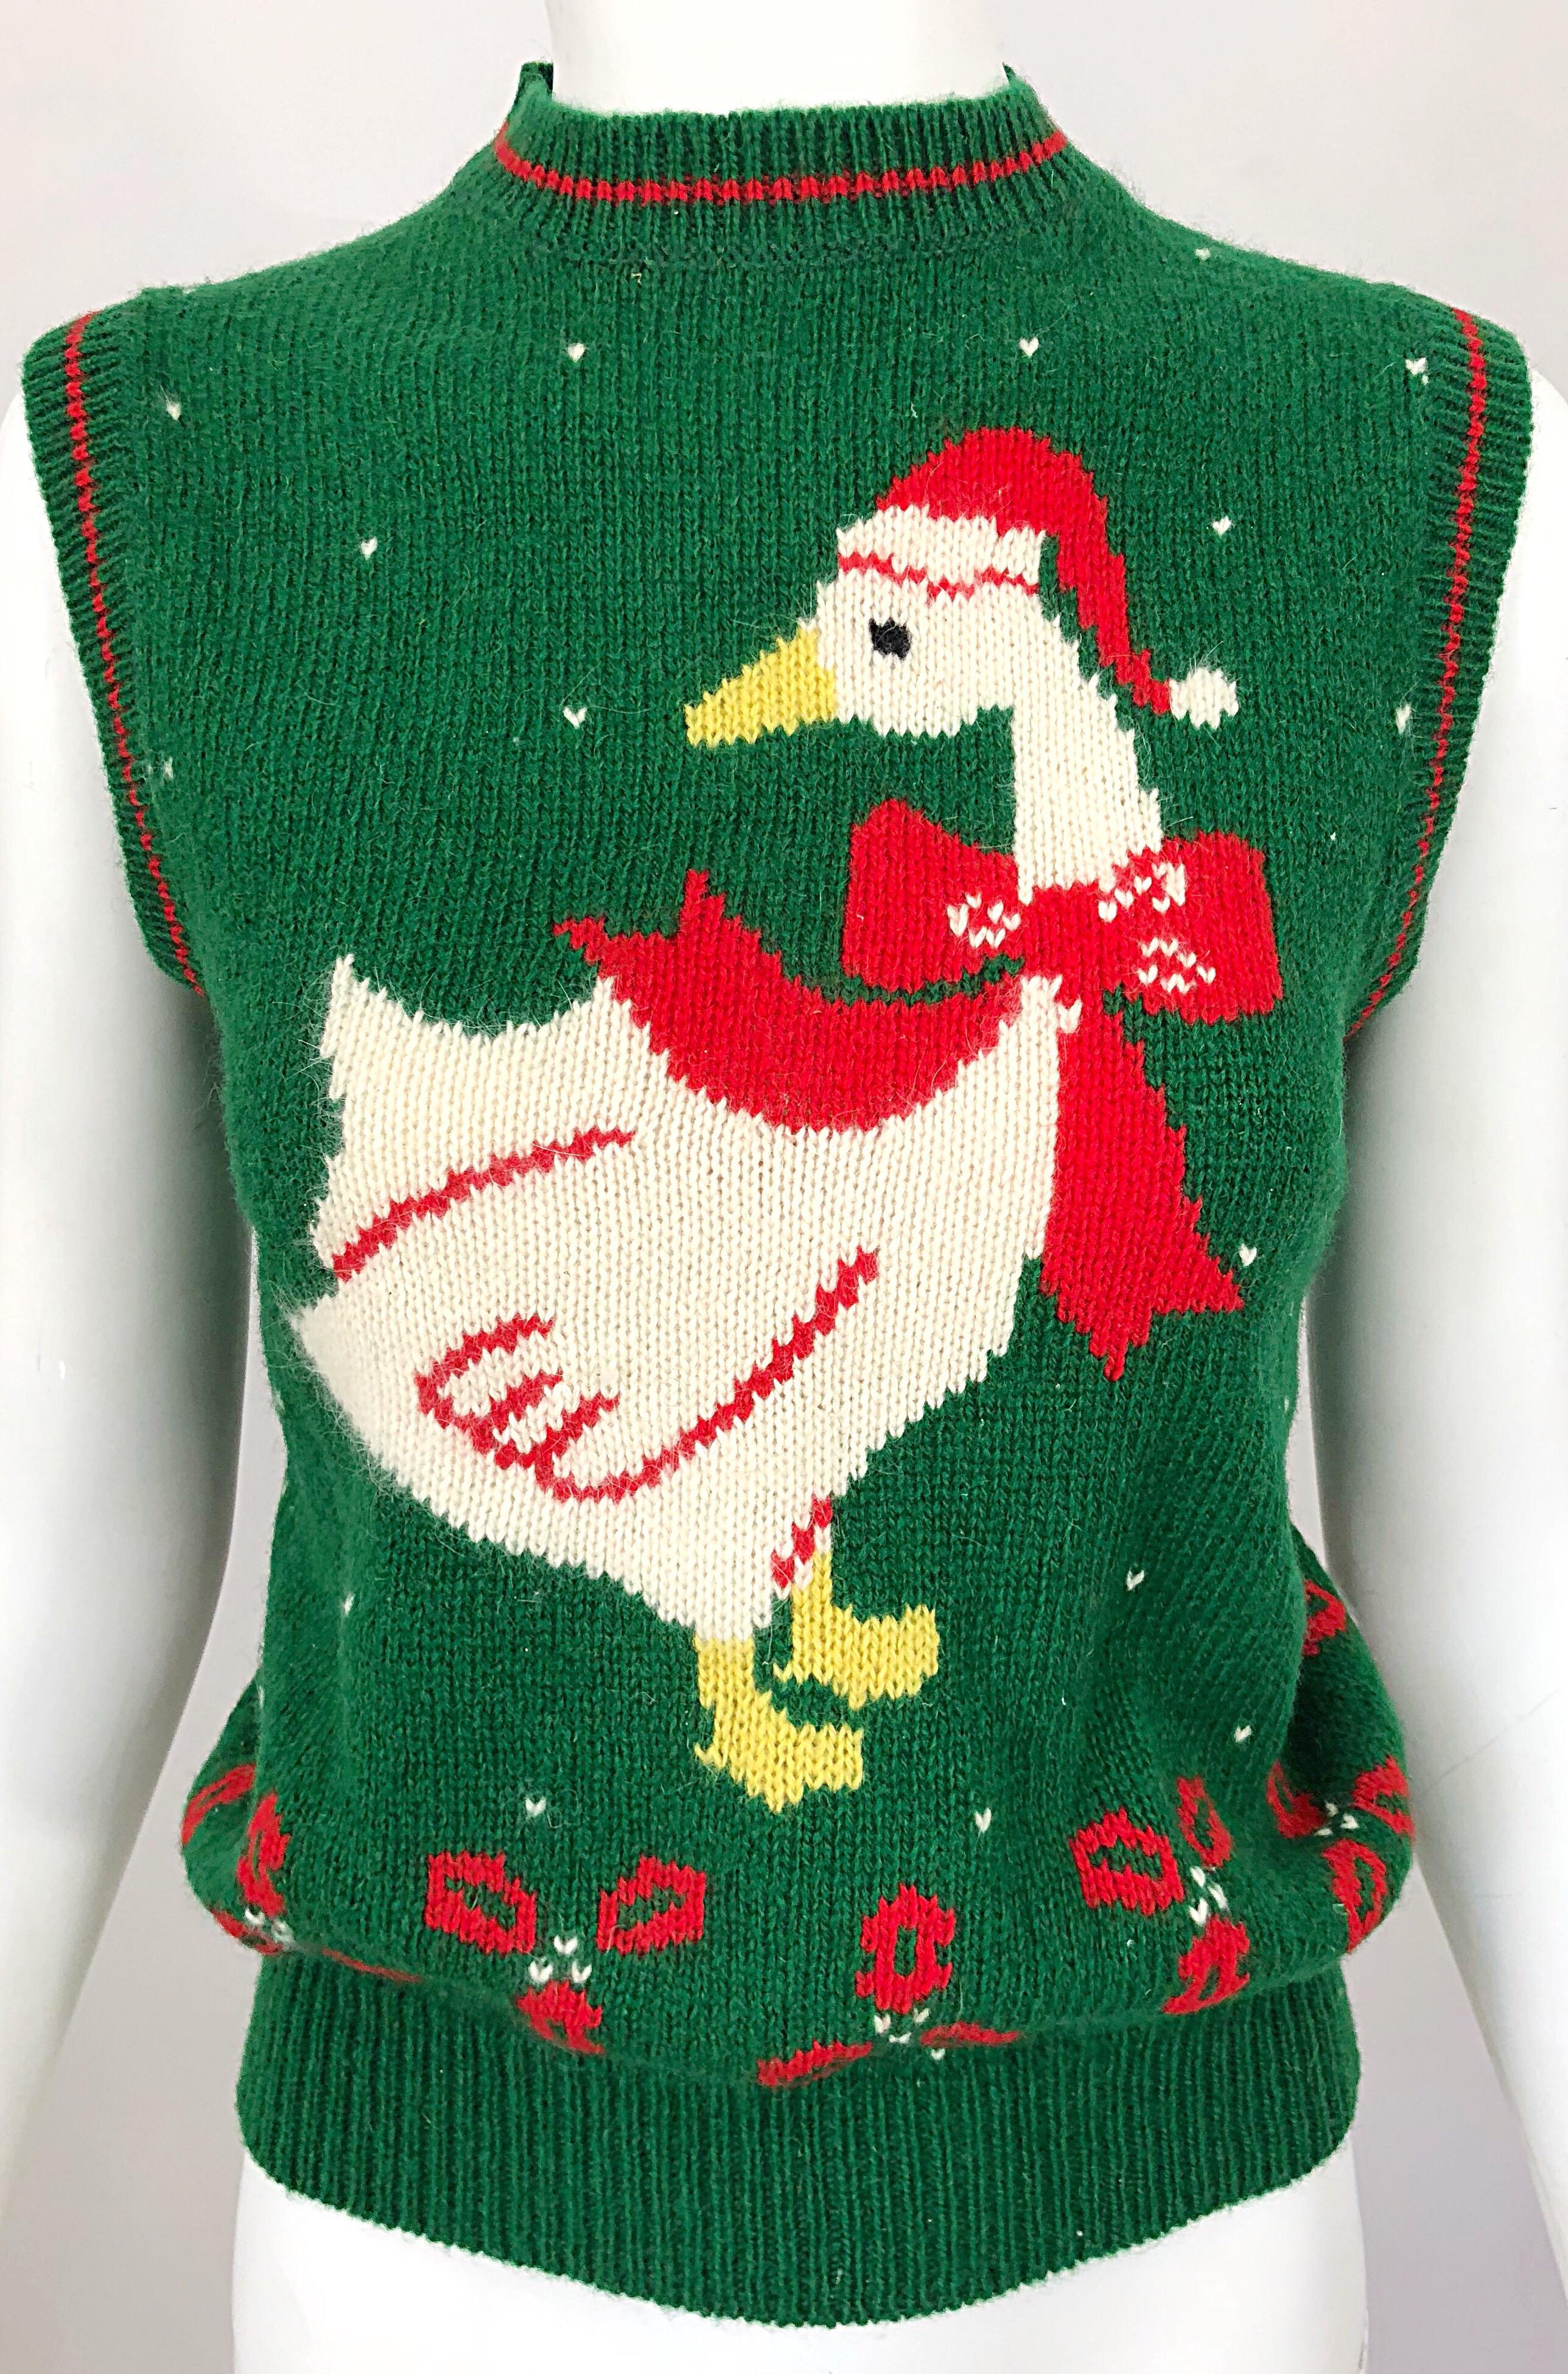 1970s Green and Red Intarsia Wool Swan Novelty 70s Christmas Sweater Vest 4